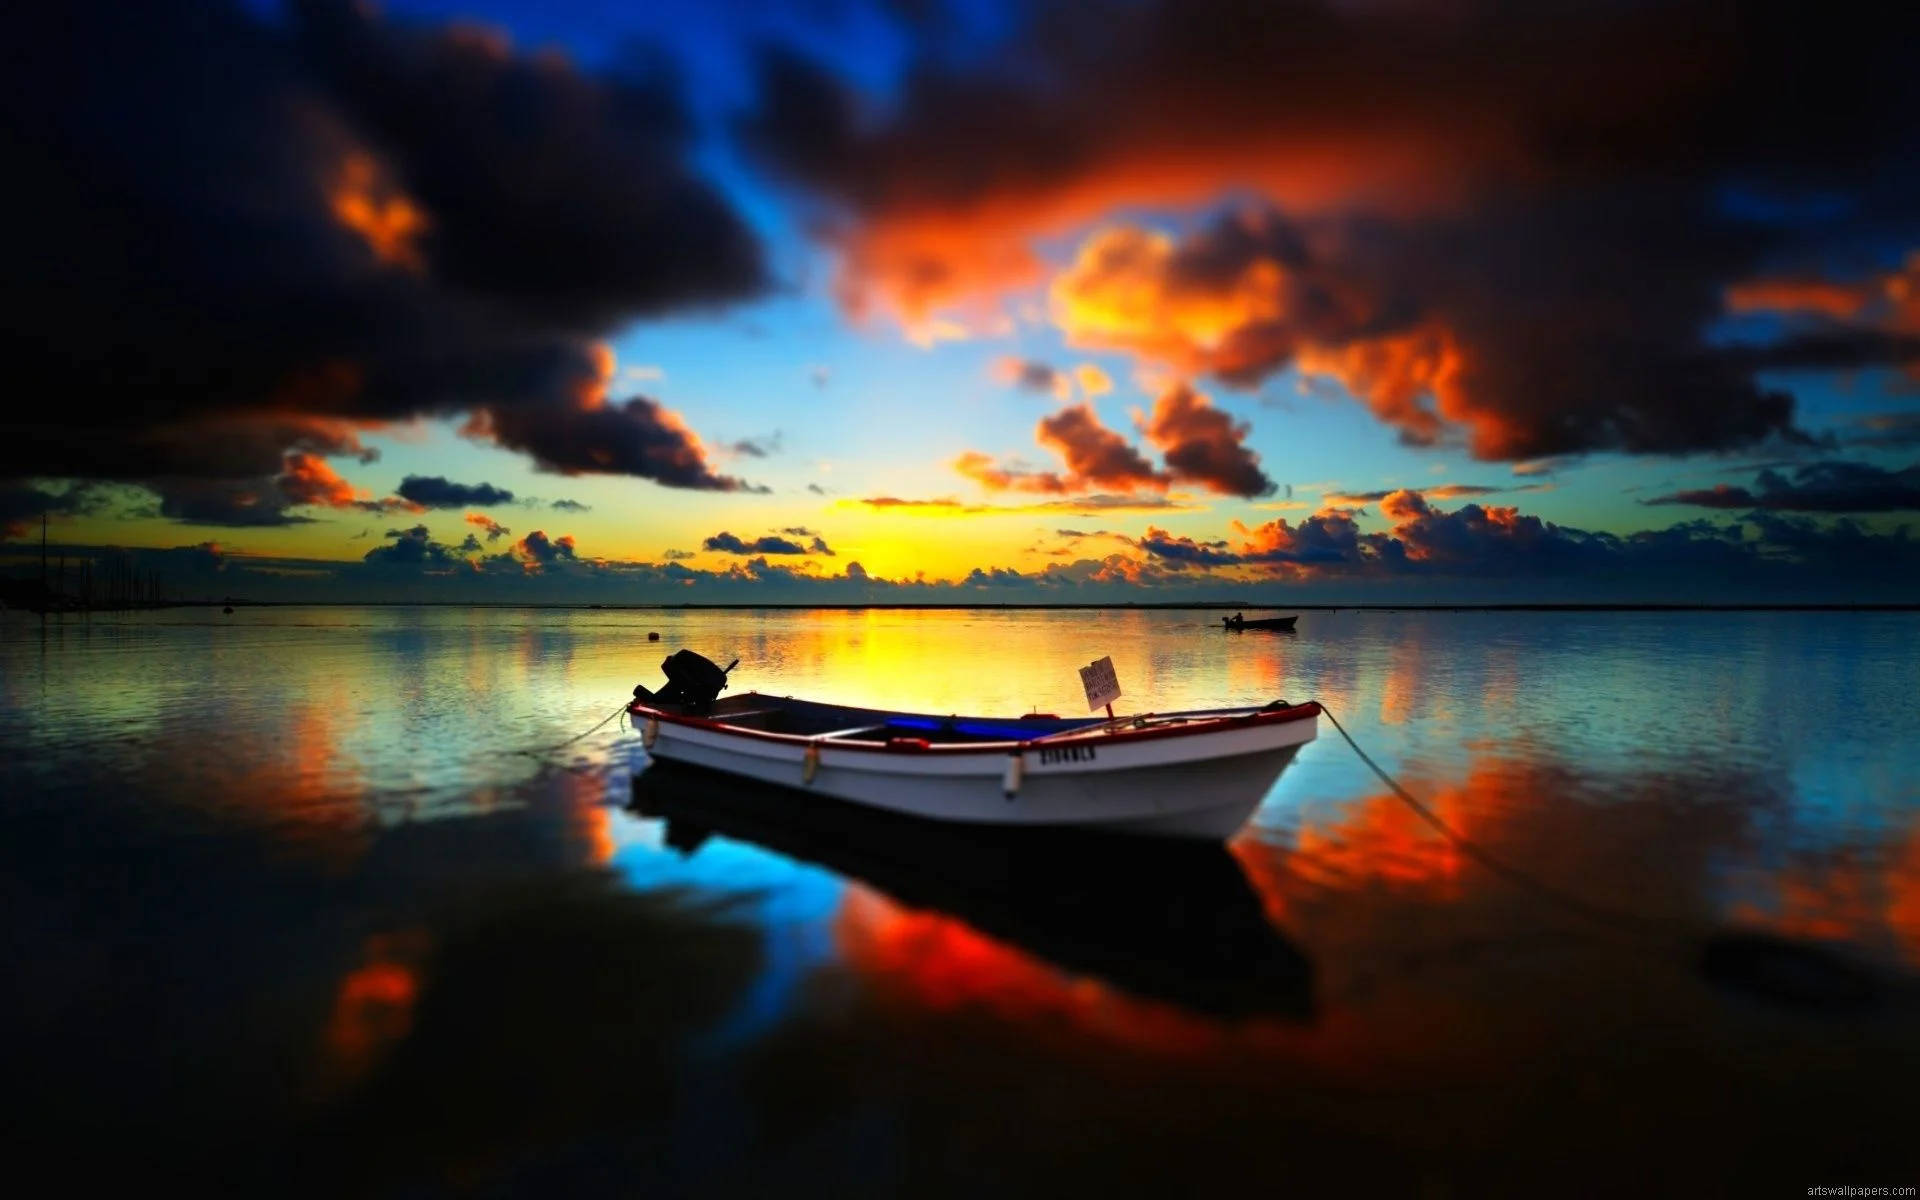 Colorful Hd Photography Of A Lonely Boat